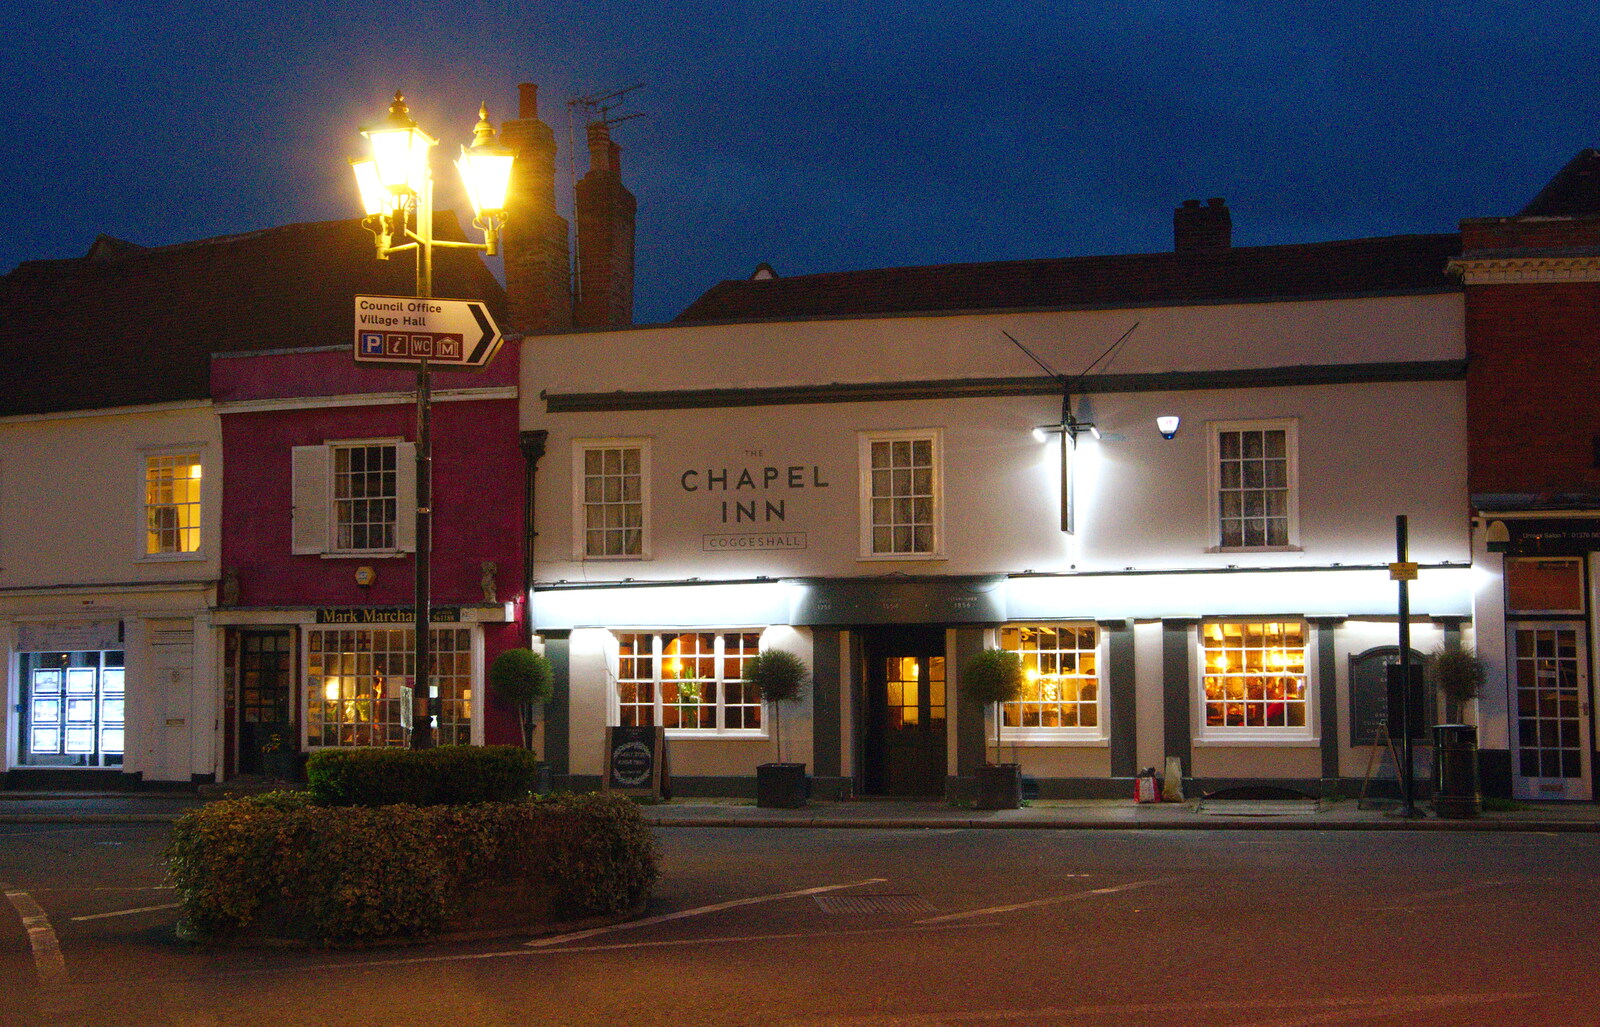 Our next destination: the Chapel Inn from The BSCC Bike Ride 2019, Coggeshall, Essex - 11th May 2019